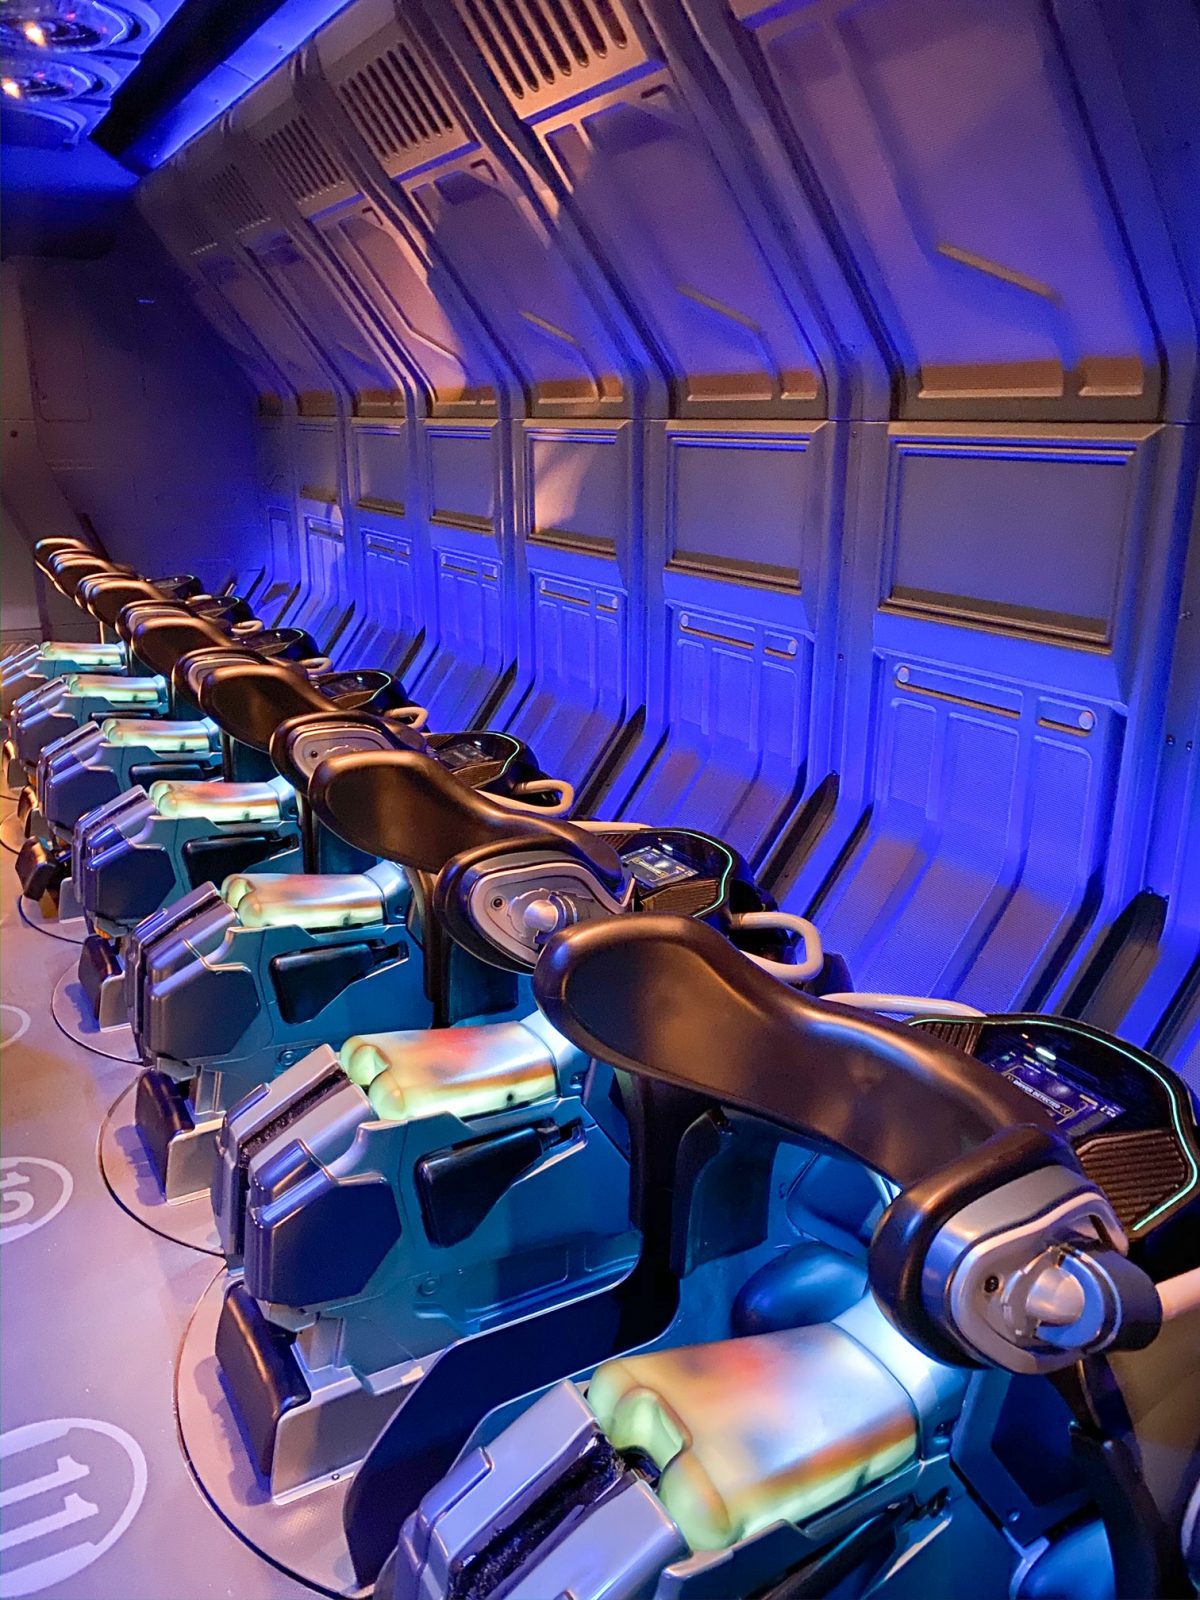 The seats of flight of passage; this is a ride at Disney World that you can bring bags on